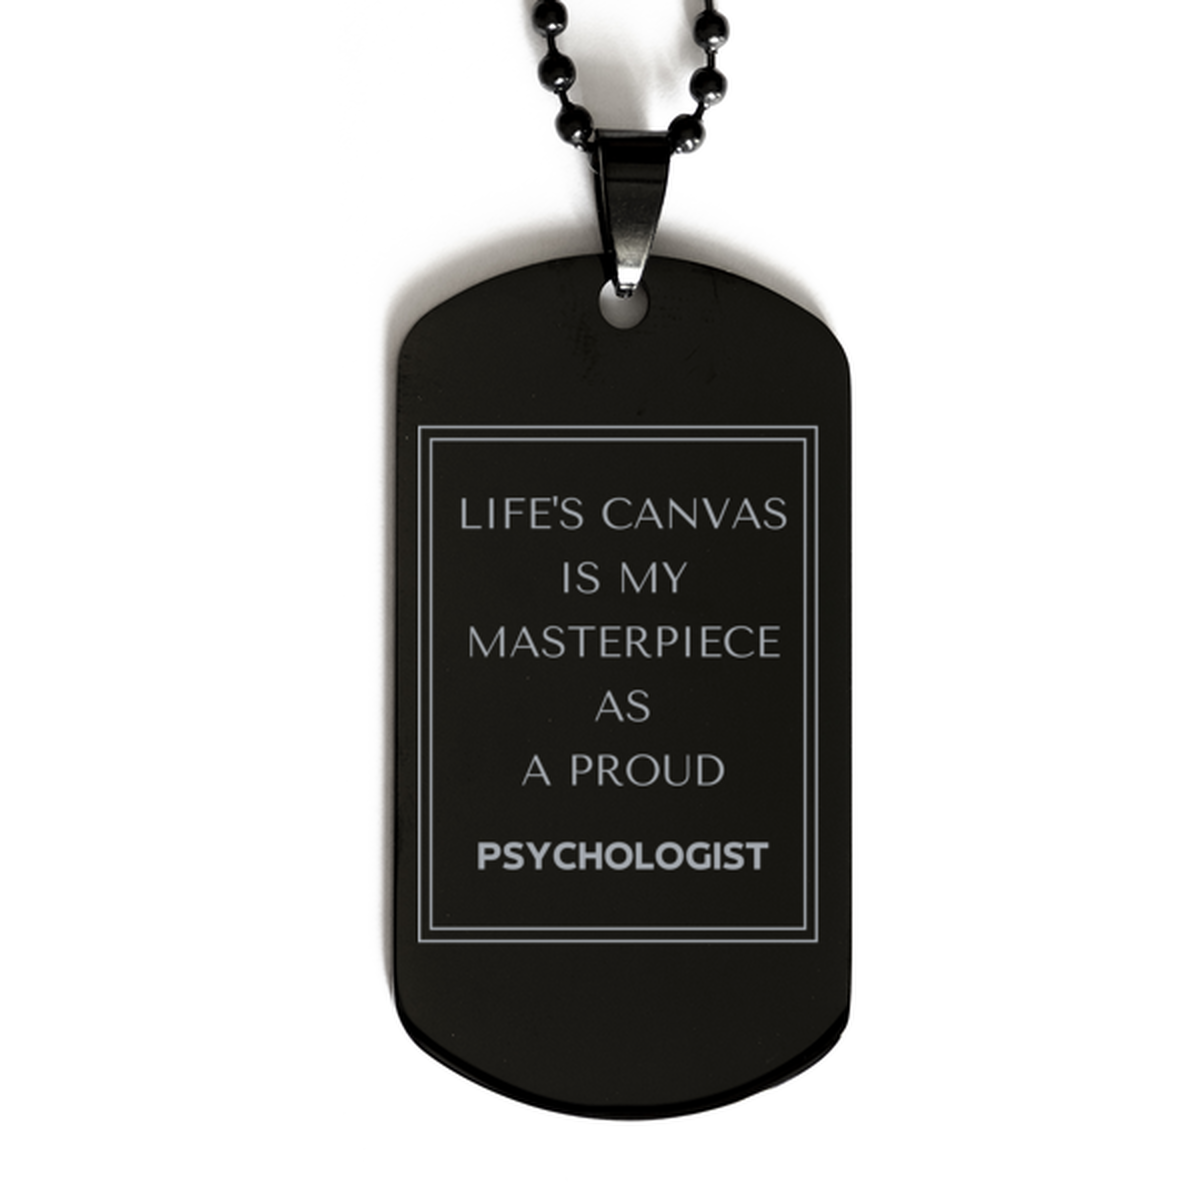 Proud Psychologist Gifts, Life's canvas is my masterpiece, Epic Birthday Christmas Unique Black Dog Tag For Psychologist, Coworkers, Men, Women, Friends